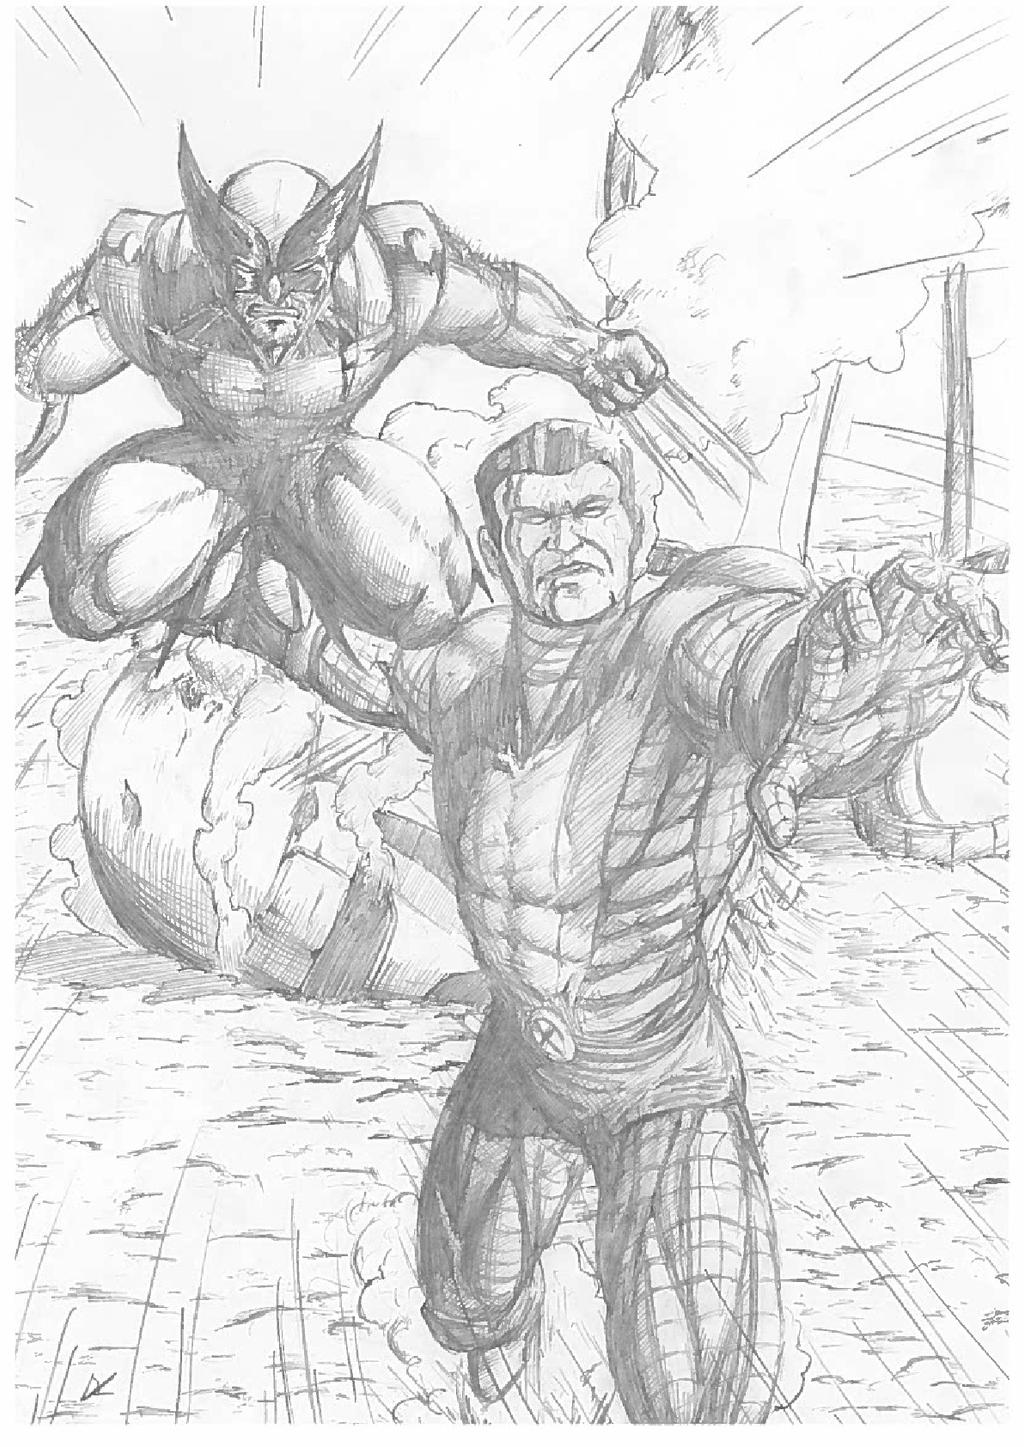 Colossus and Wolverine (pencil)